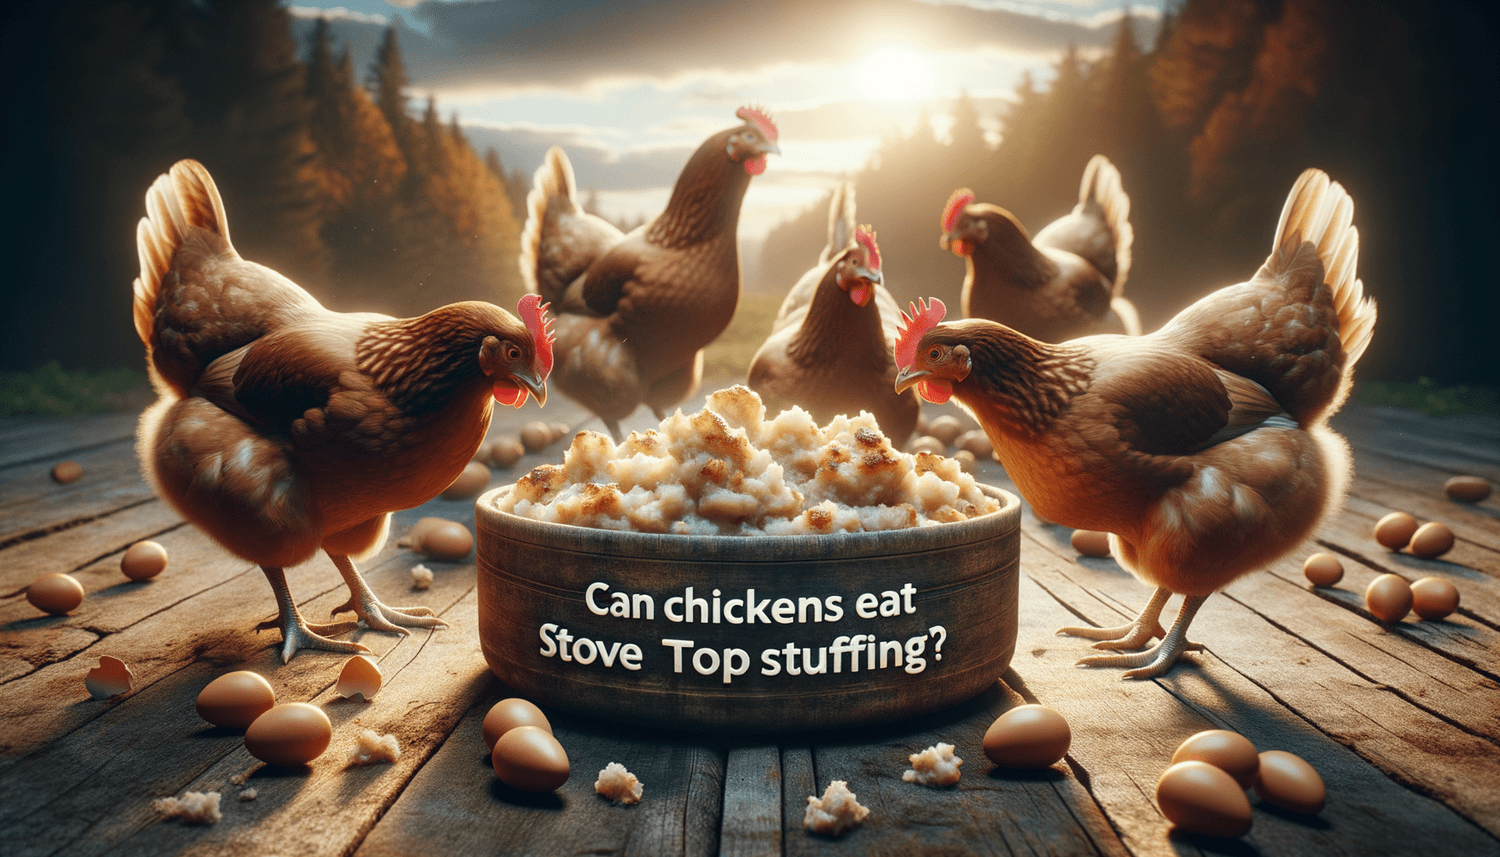 Can Chickens Eat Stove Top Stuffing?